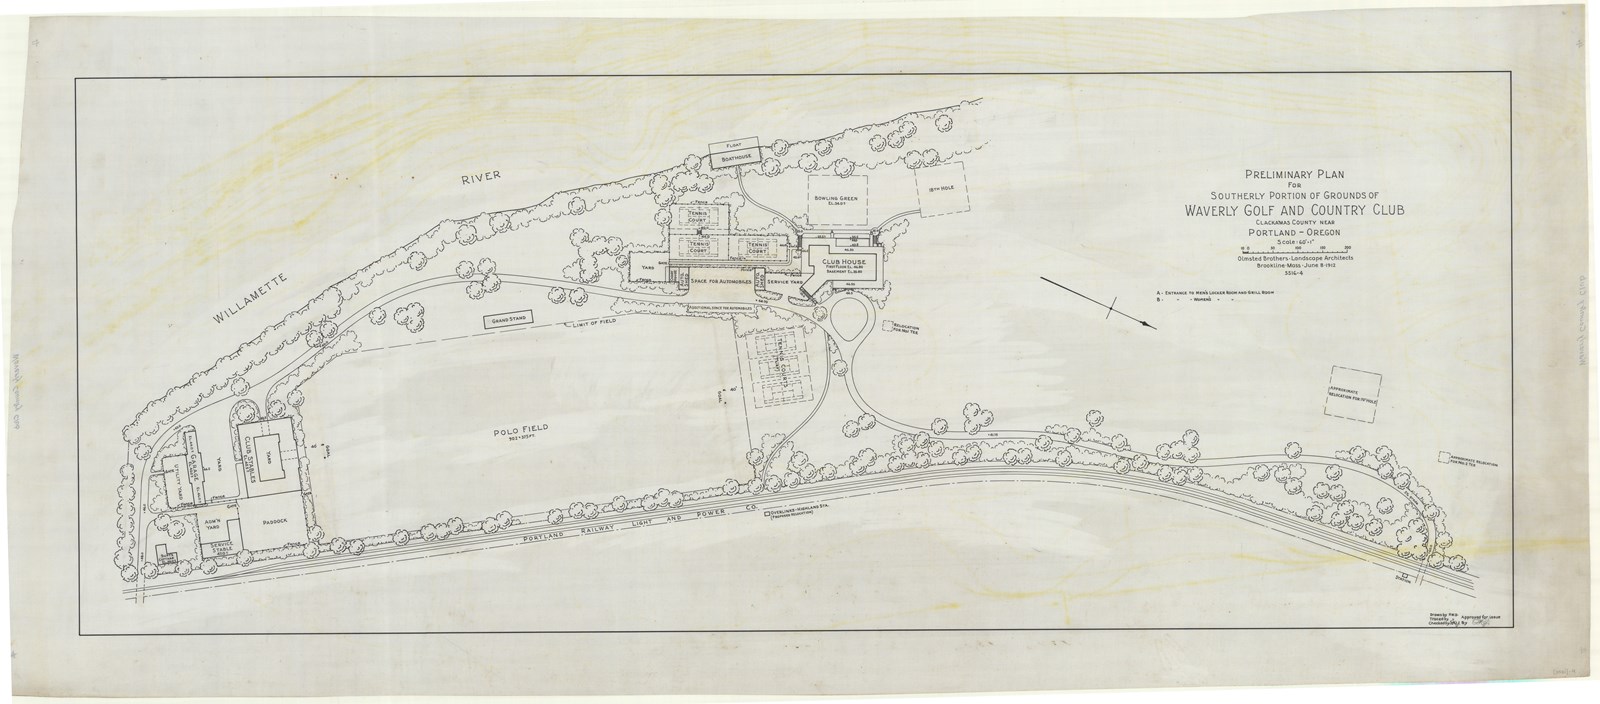 Pencil plan of country club with buildings along tree lined road, open rectangular polo field